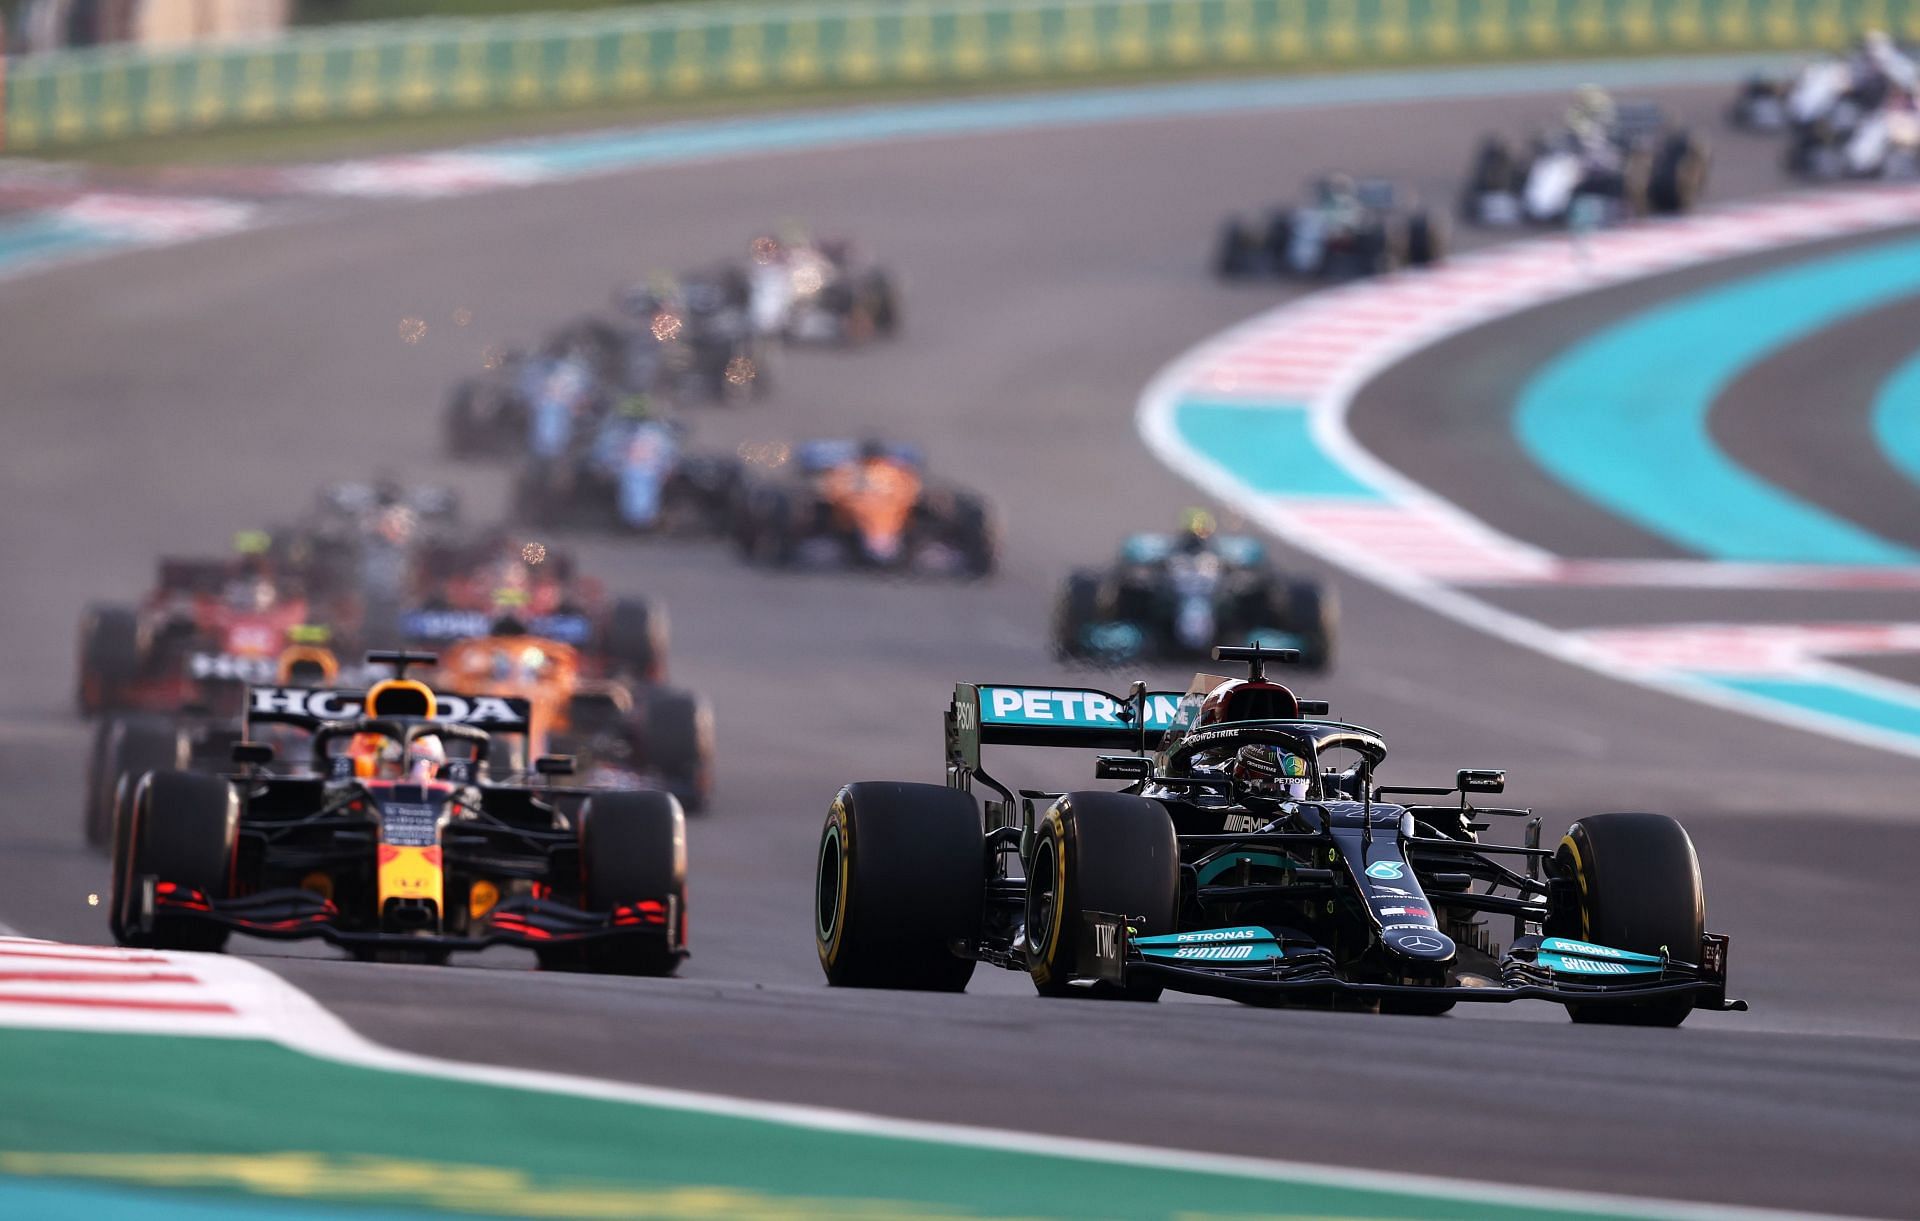 Max Verstappen (left) driving the Red Bull RB16B overtook Lewis Hamilton (right) in the Mercedes W12 on the last lap of the 2021 Abu Dhabi Grand Prix to clinch his first F1 world championship